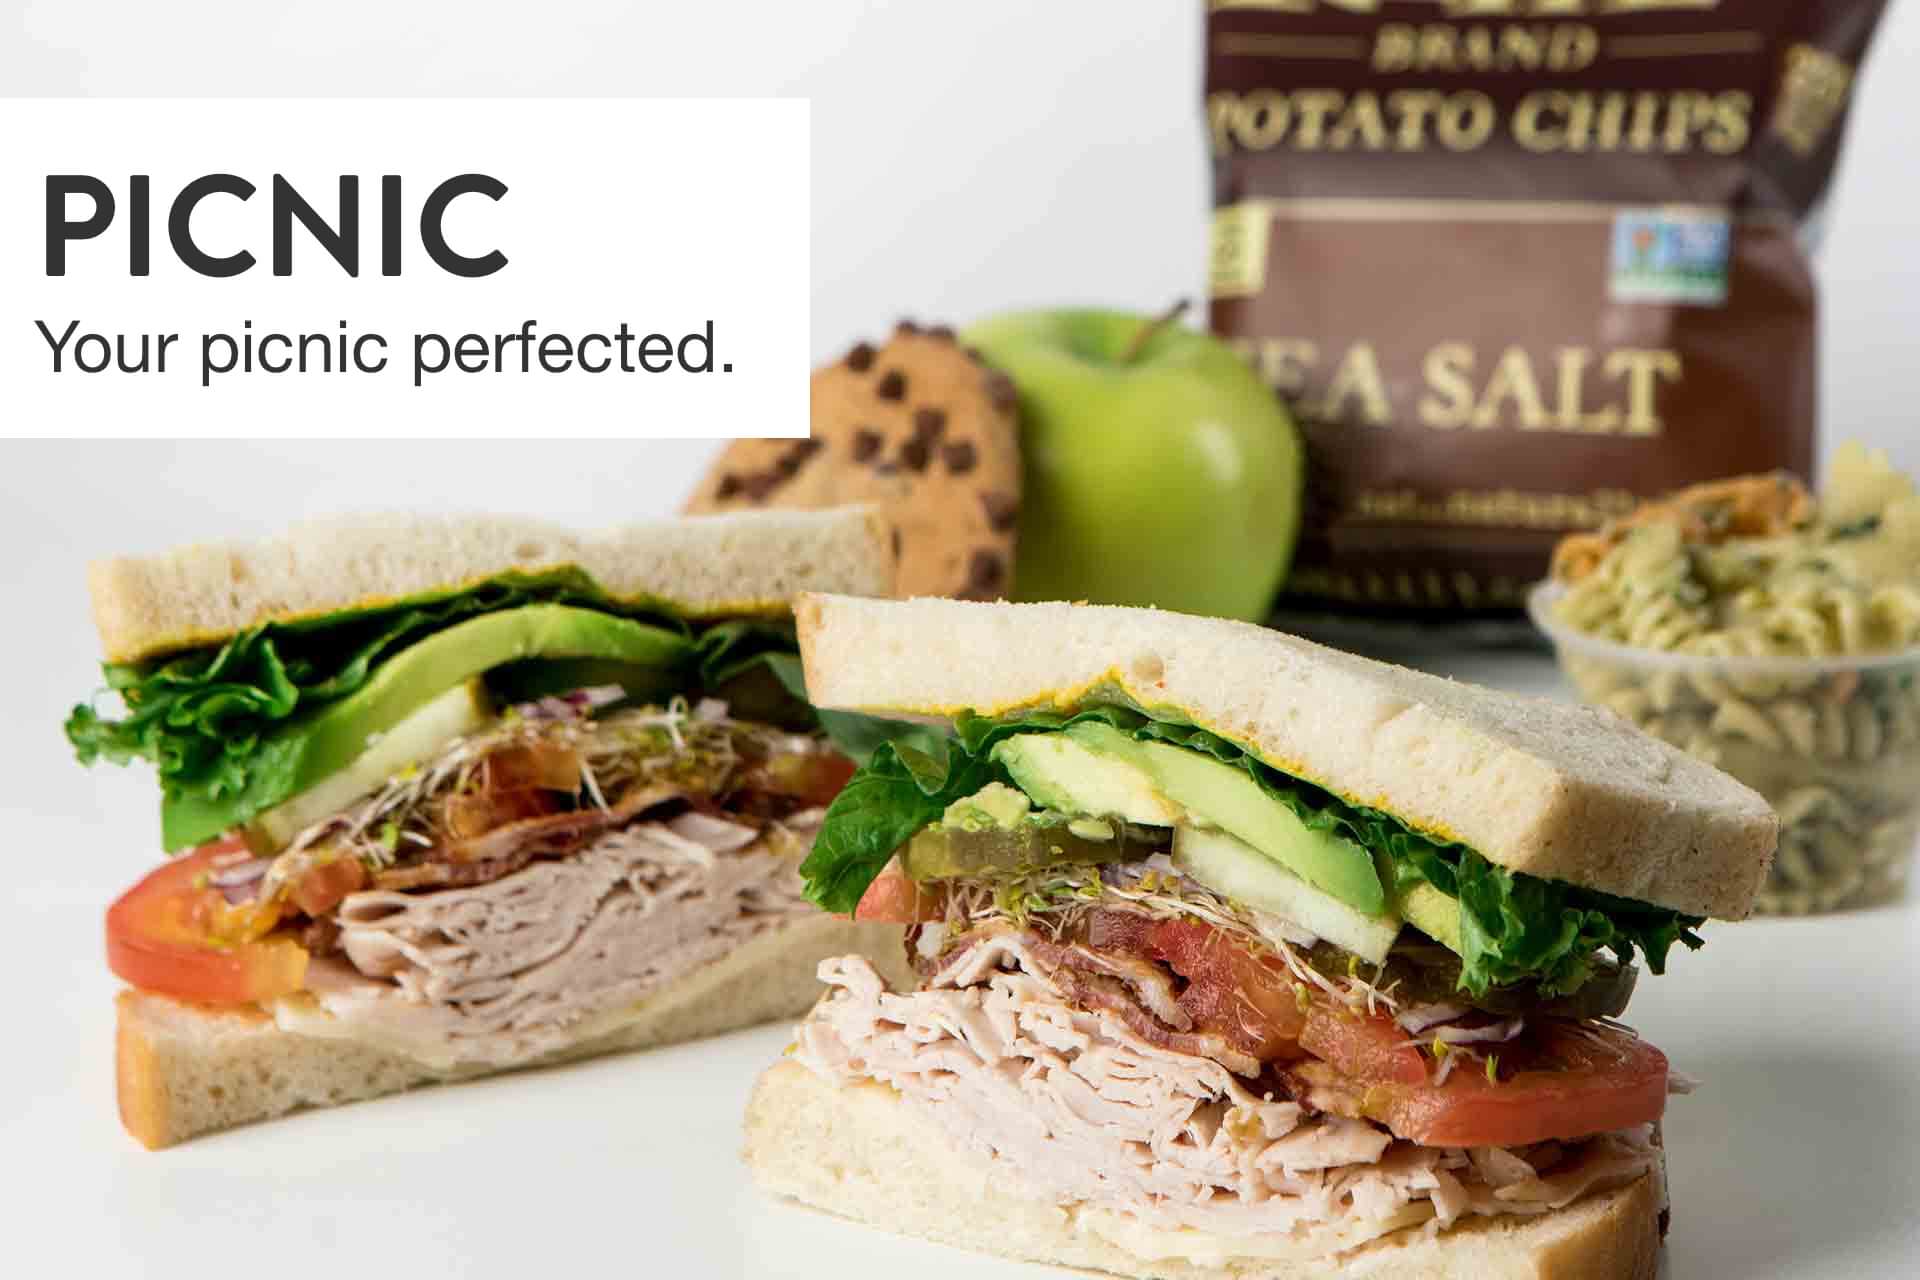 Picnic - Your picnic perfected.